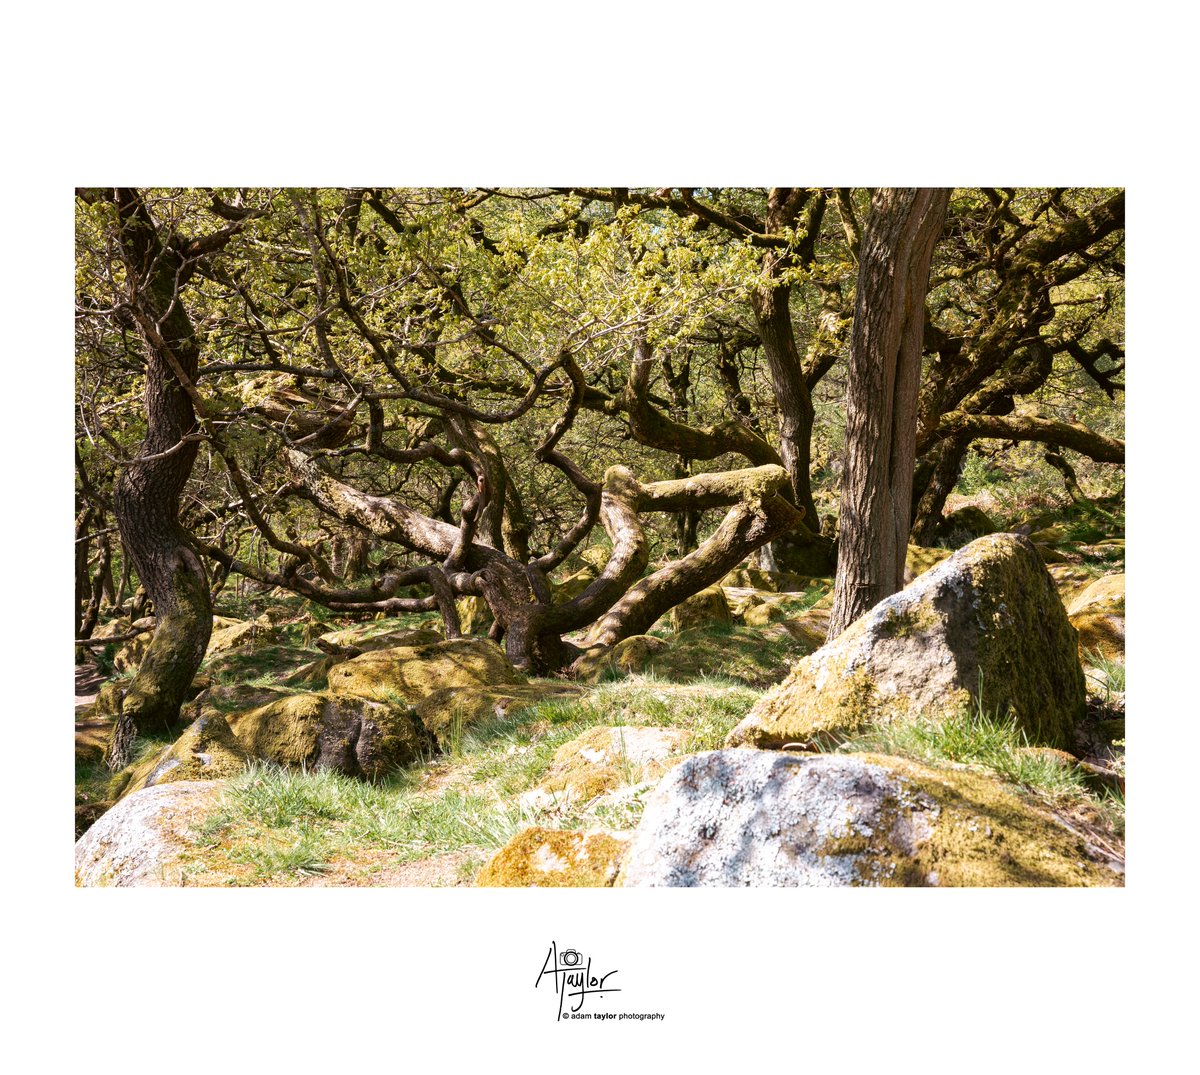 A few frames taken at Padley Gorge, a narrow valley with in the #PeakDistrict near Grindleford. Twisted oak trees populate this ancient #woodland with changing lighting conditions emphasising shapes and patterns. This was my first visit to Padley Gorge. #photography